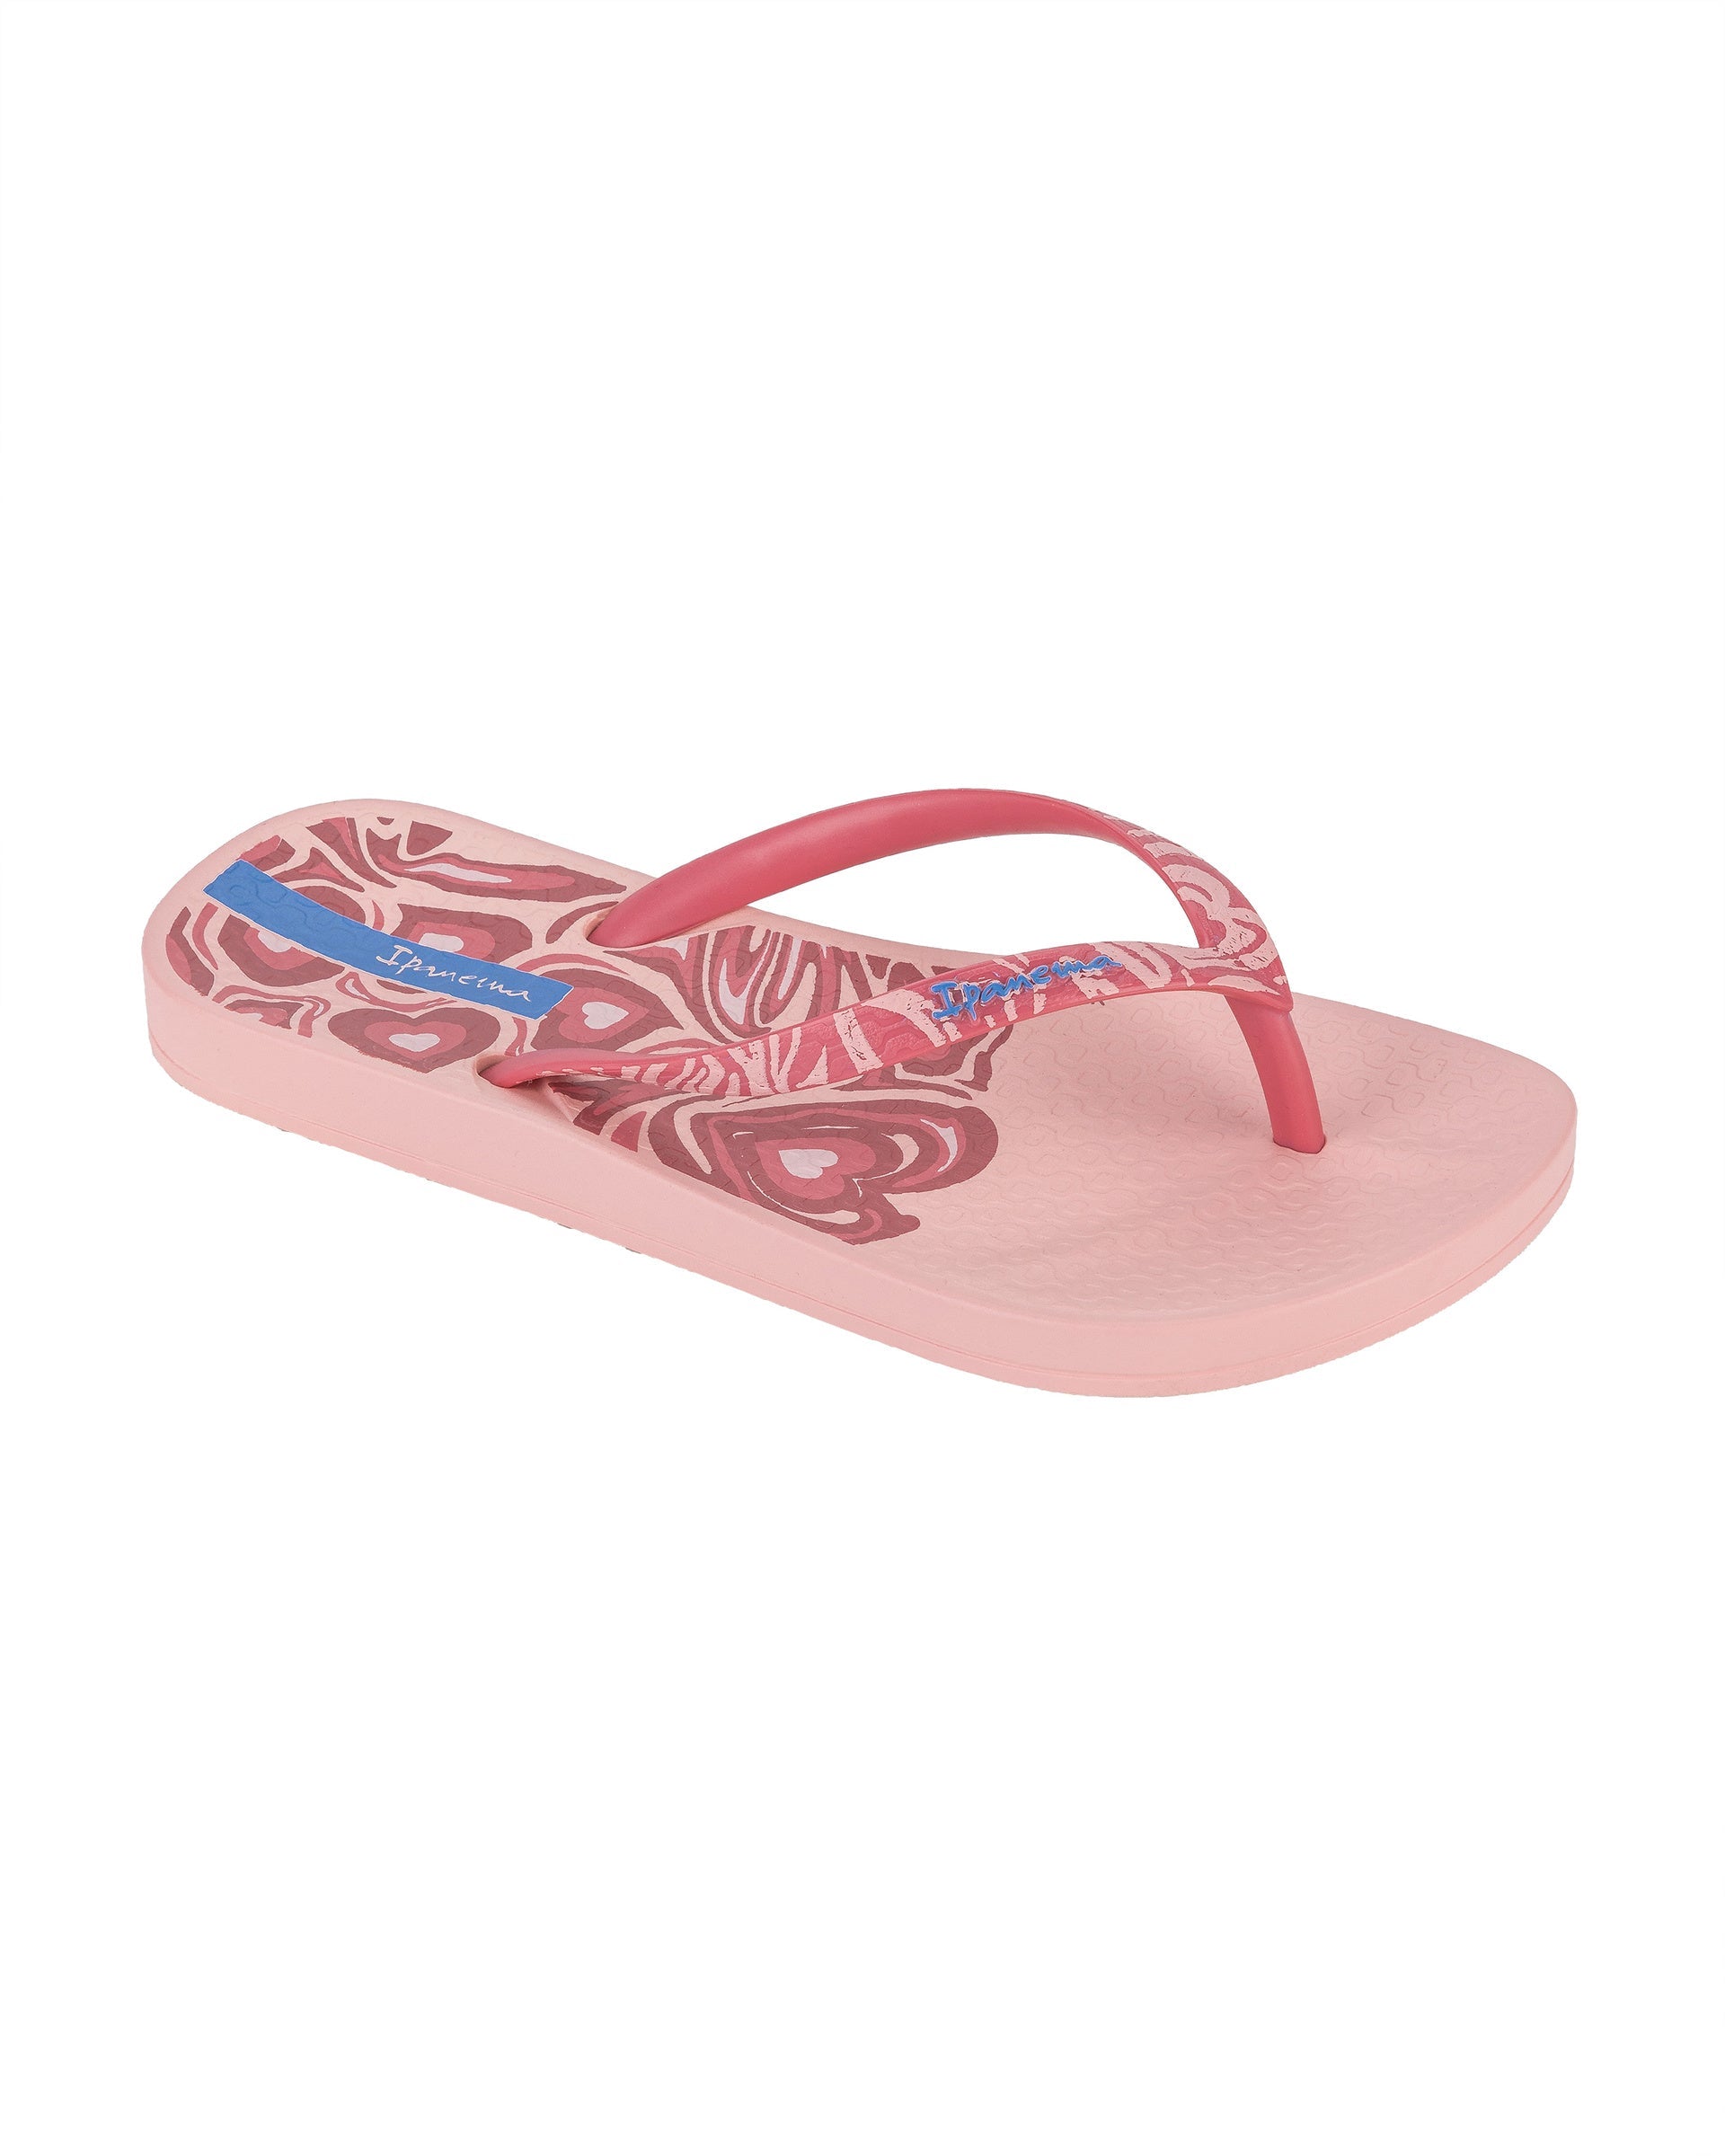 Angled view of a light pink Ipanema Nostalgic Hearts kid's flip flop with heart outlines on insole and strap.